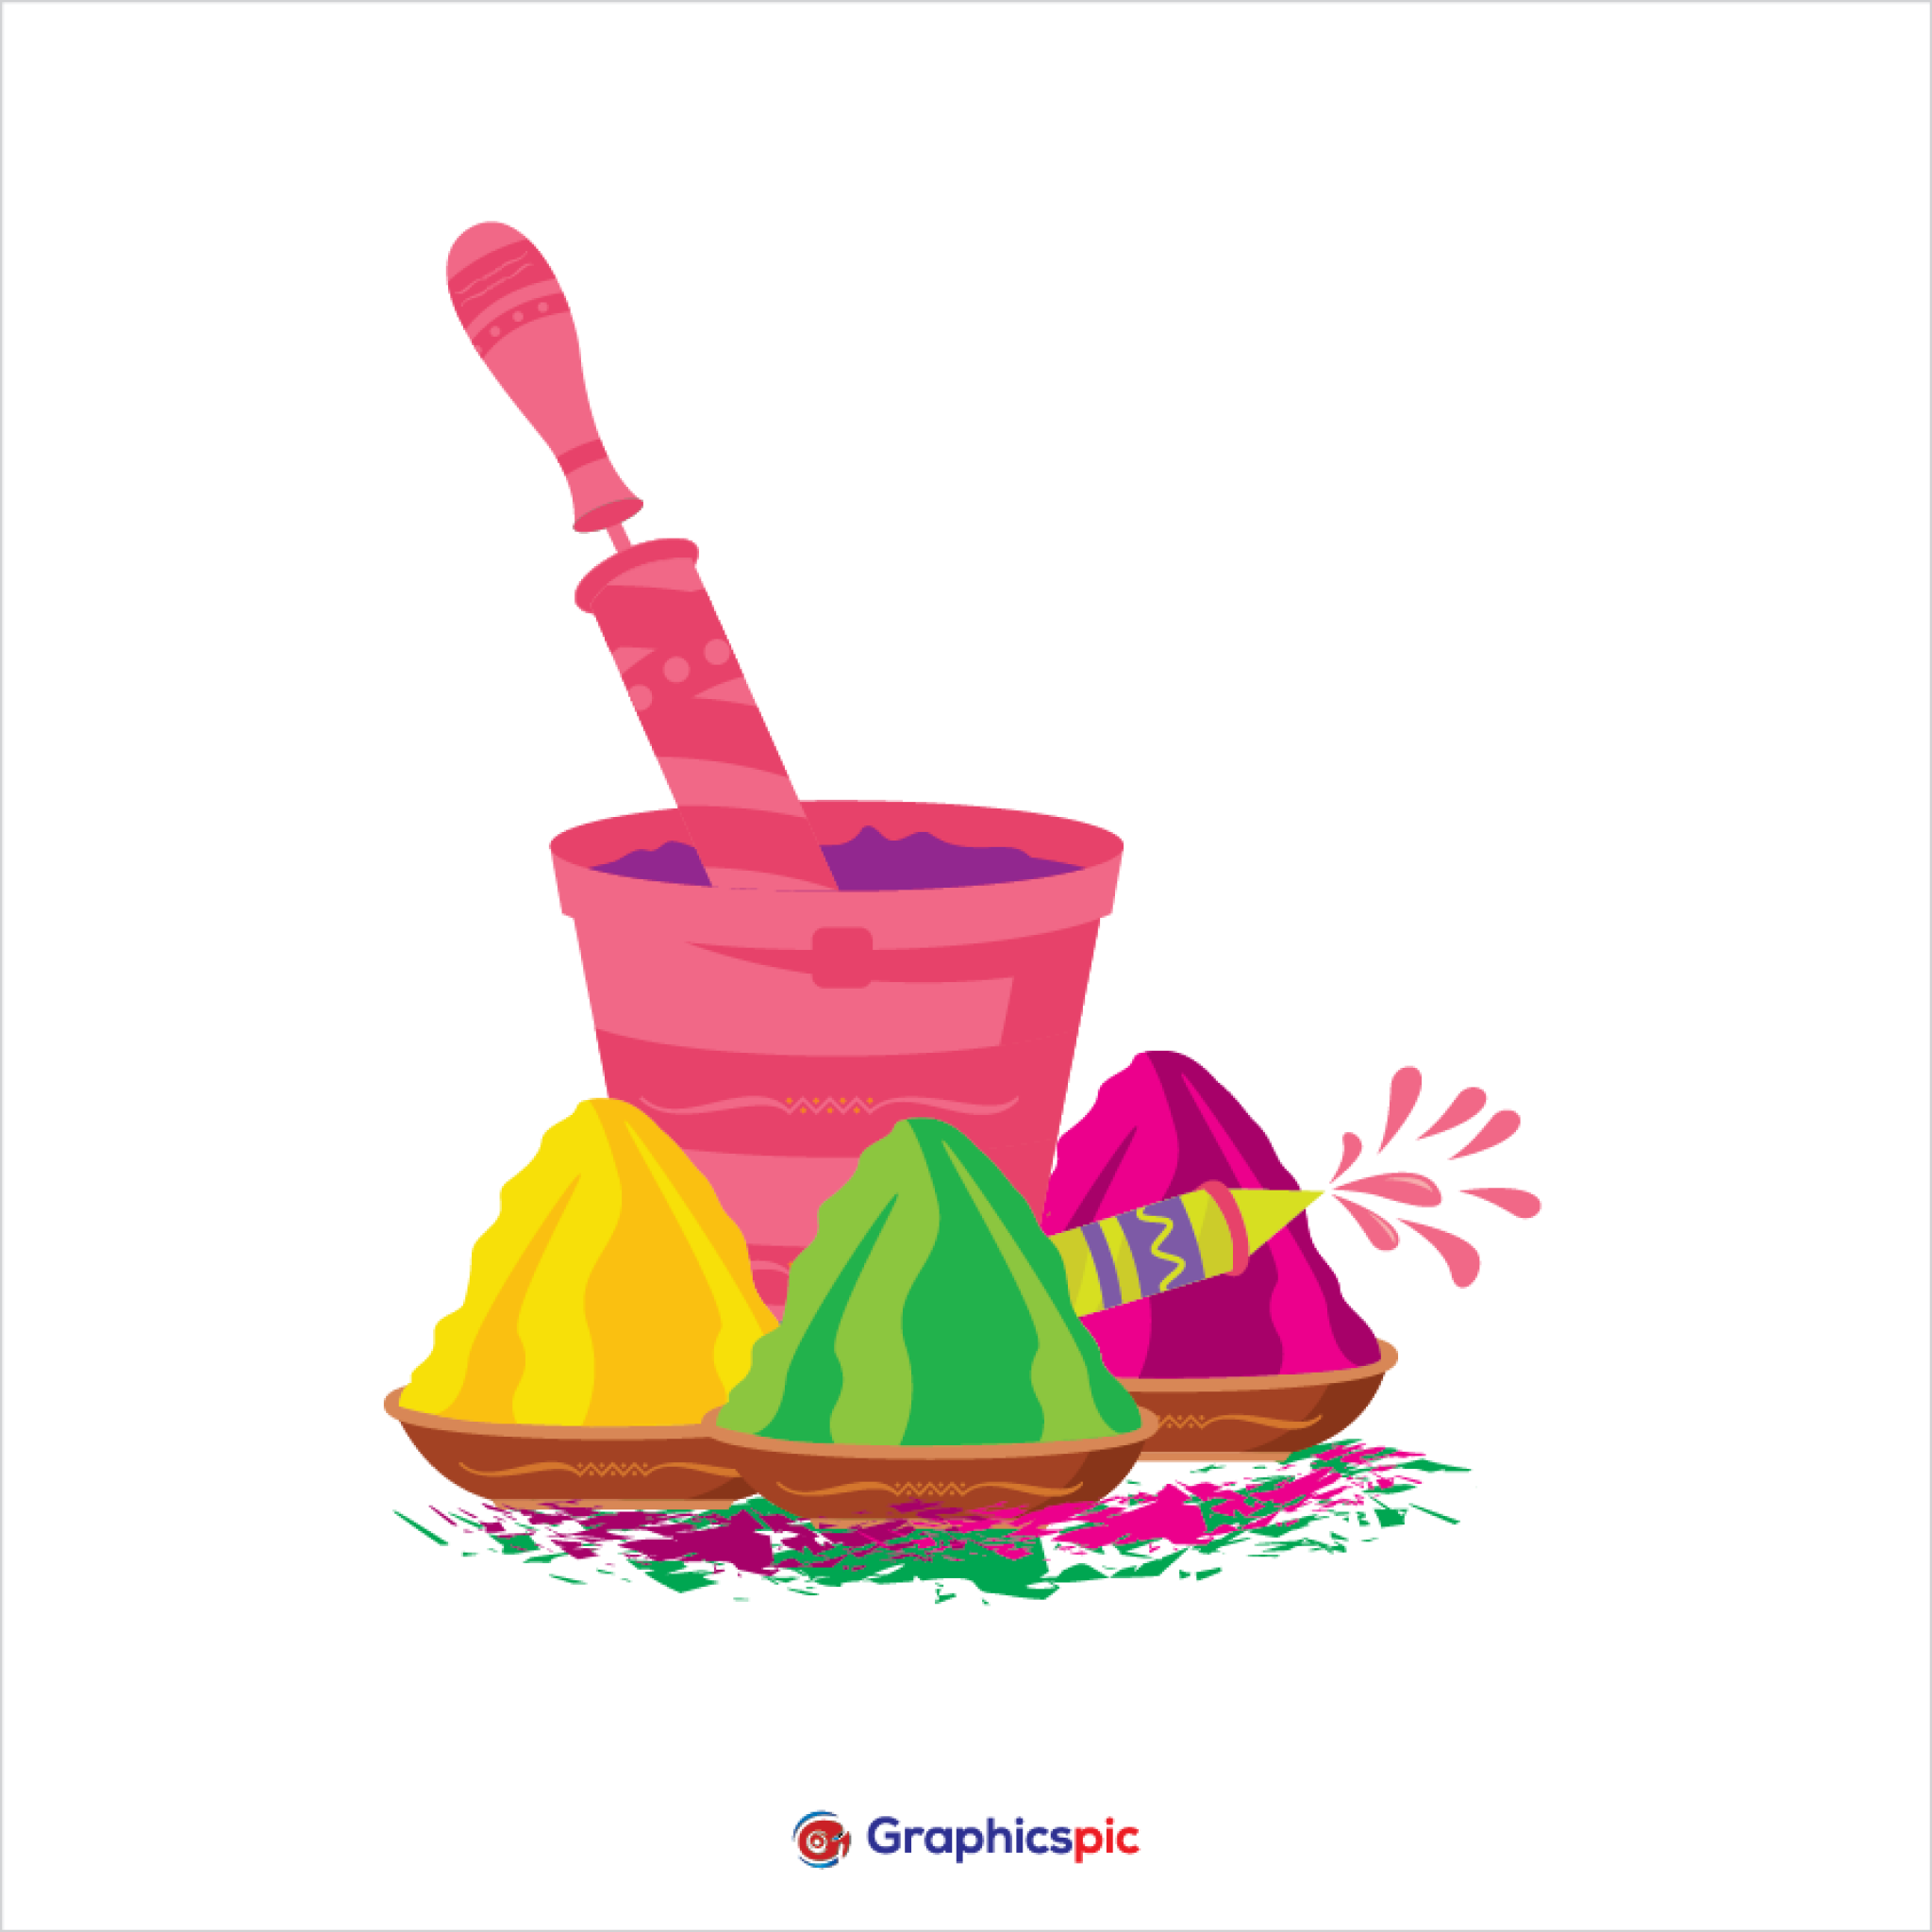 Happy Holi Colorful Elements For Card Design Free Vector Graphics Pic